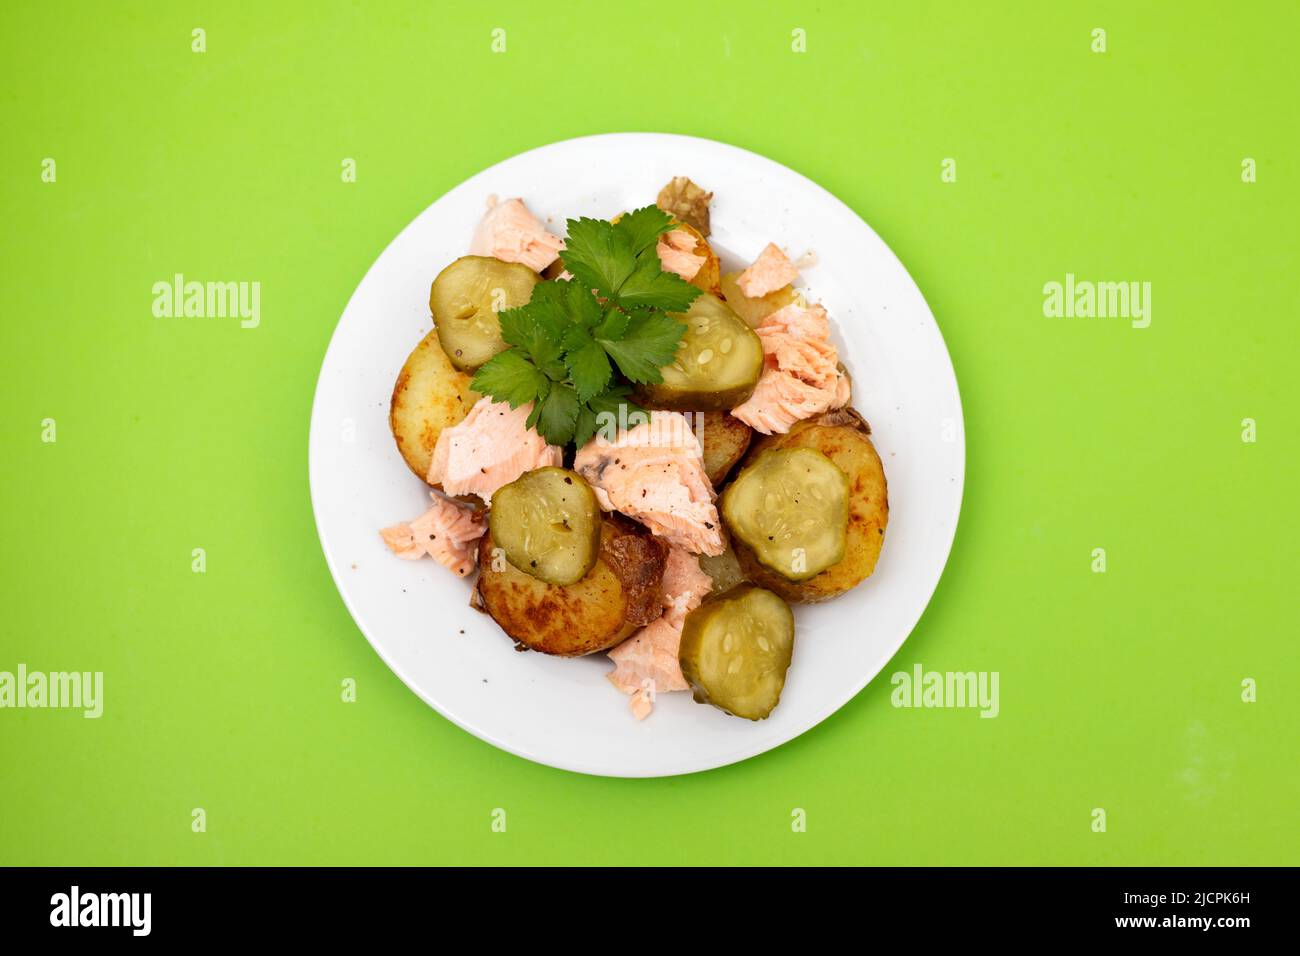 fresh baked salmon with fried potato and cucumber on plate Stock Photo